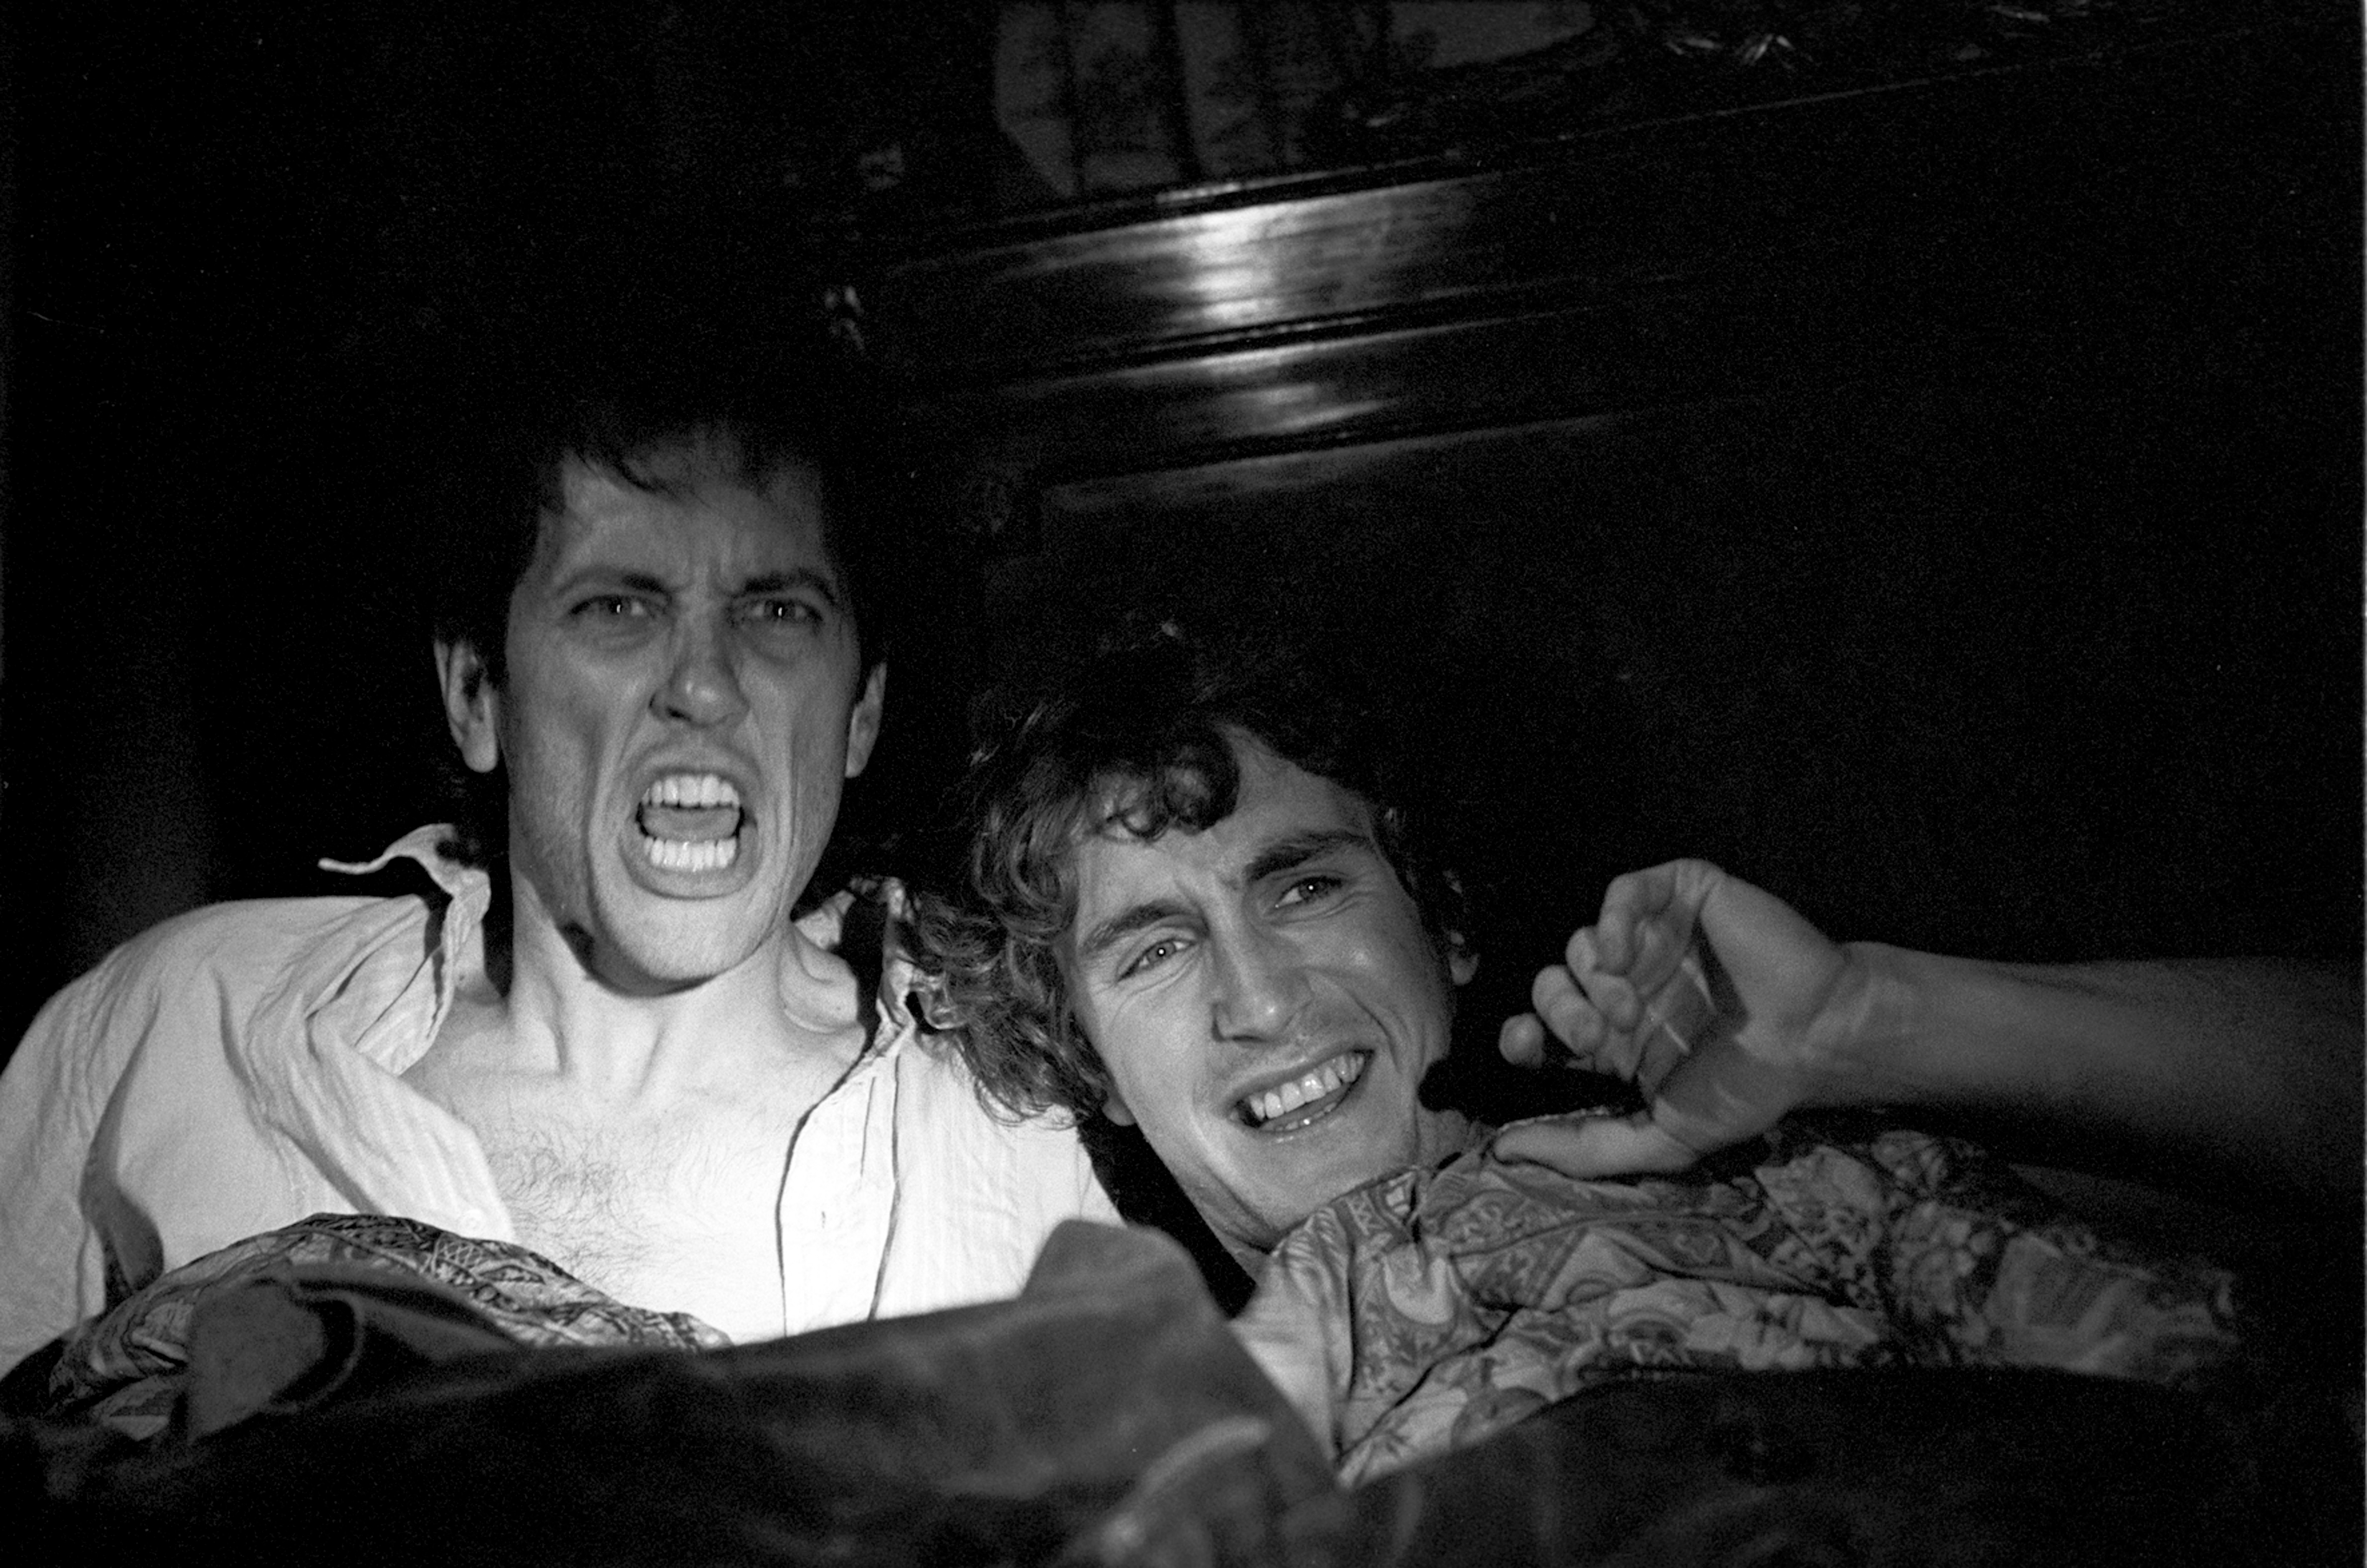 Still of Richard E. Grant and Paul McGann in Withnail & I (1987)